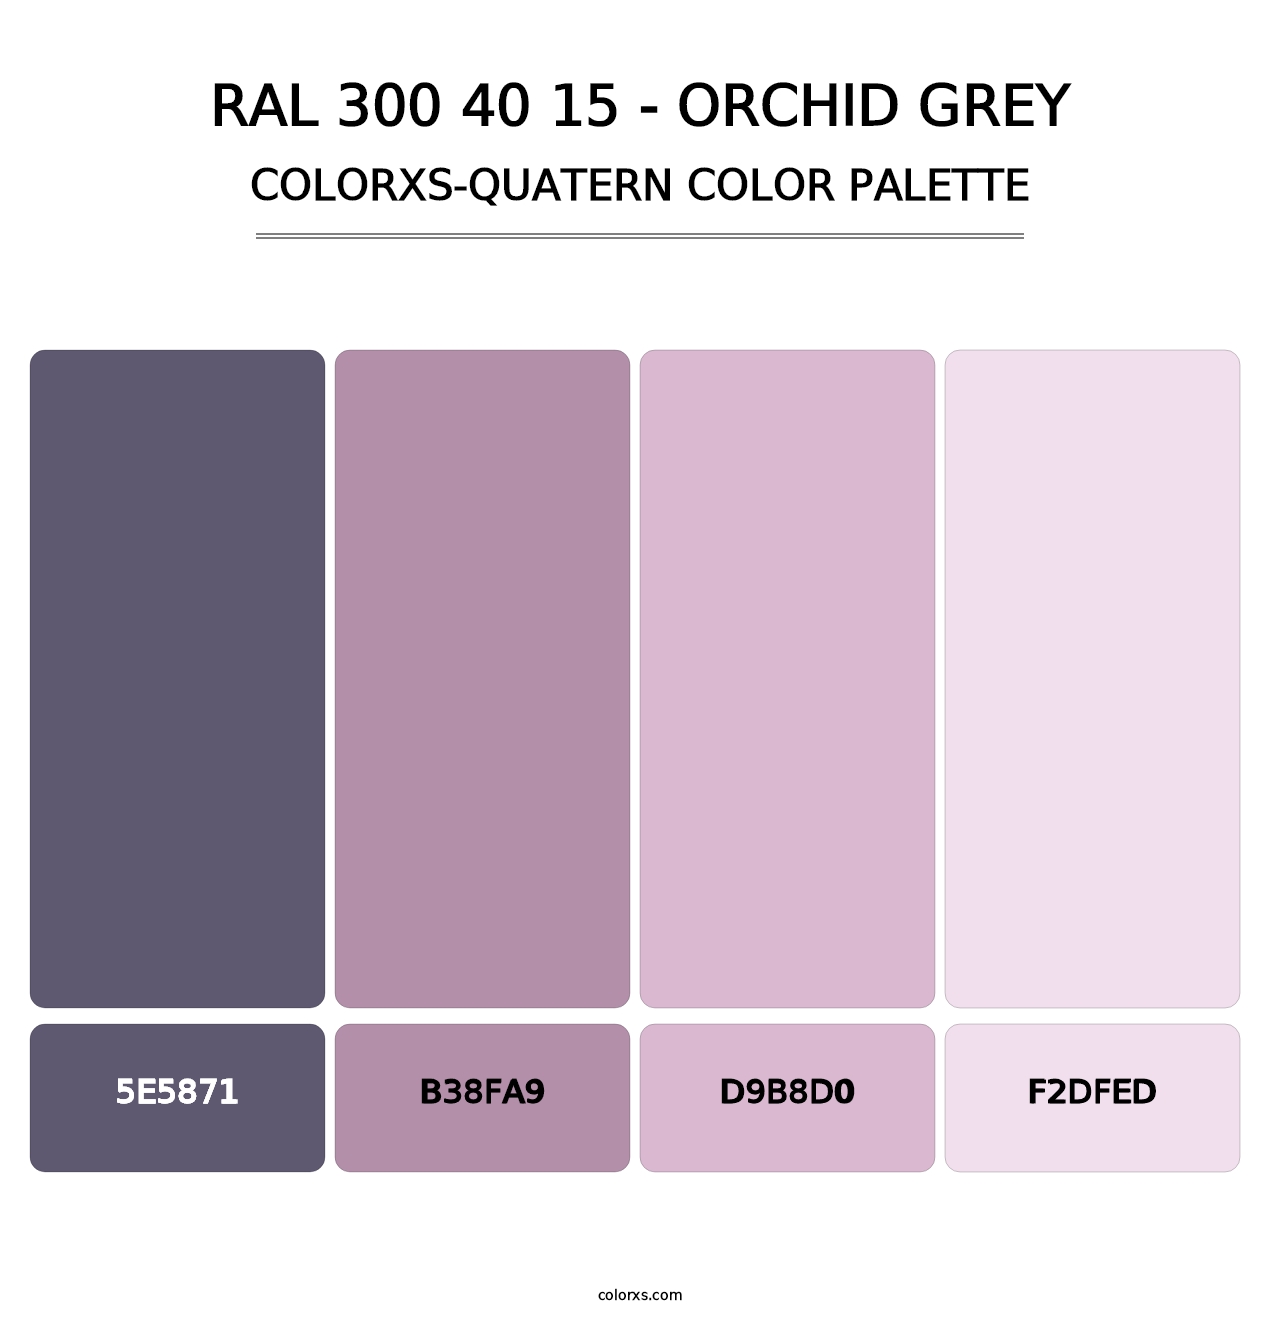 RAL 300 40 15 - Orchid Grey - Colorxs Quatern Palette